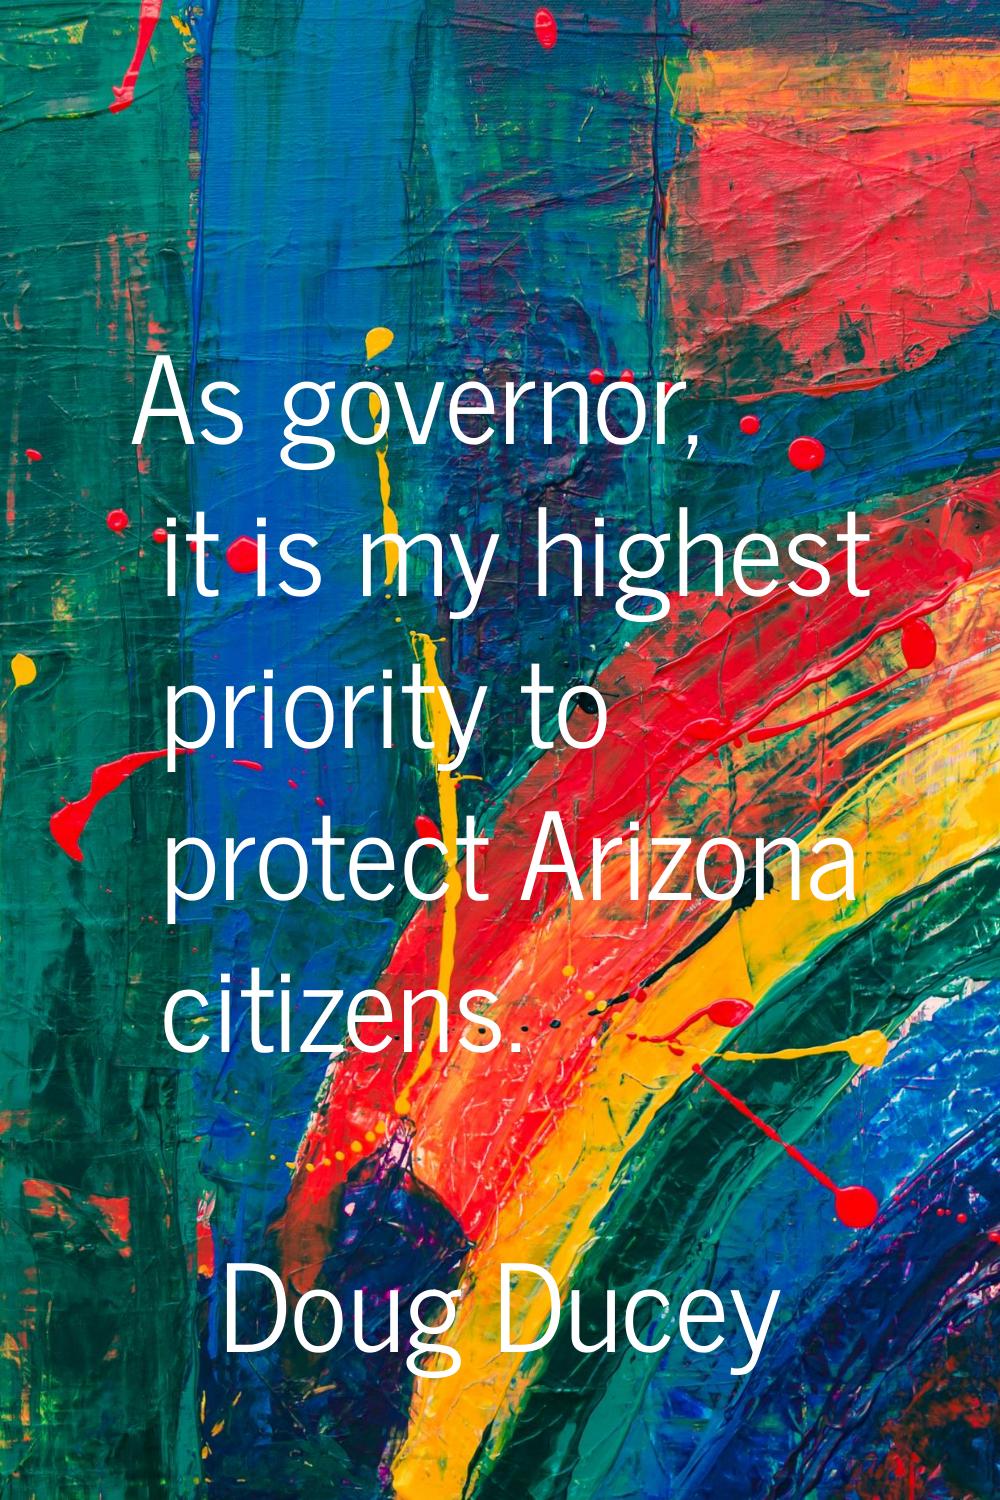 As governor, it is my highest priority to protect Arizona citizens.